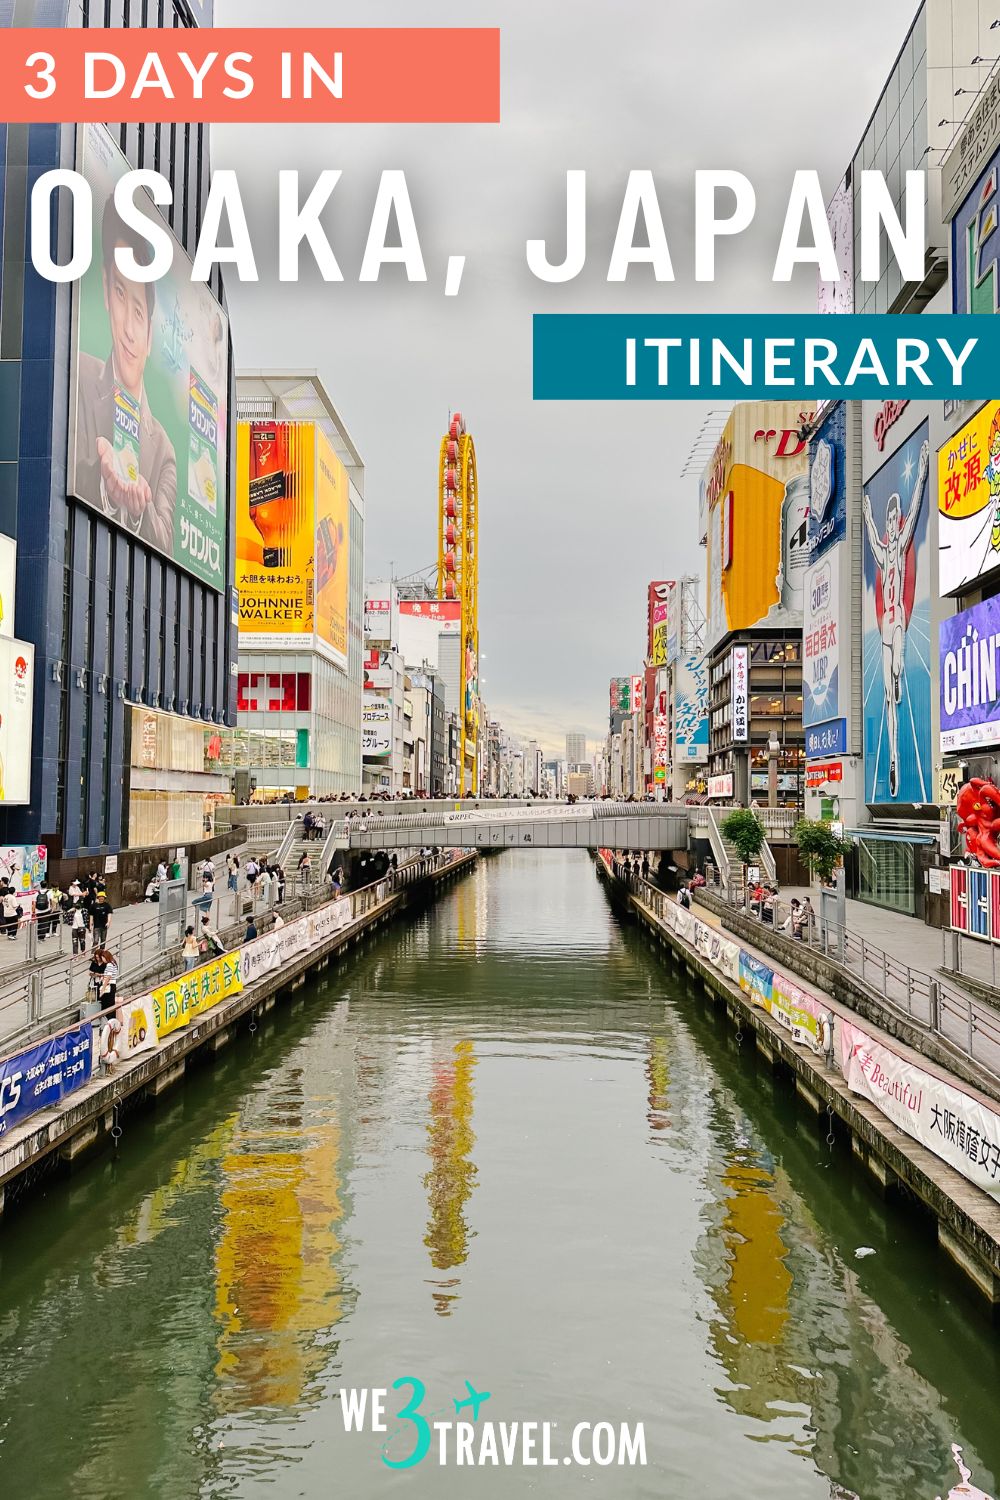 Planning a Japan vacation? Find out how to spend 3 fun-filled days soaking up the Japanese culture, history, and local food with this Osaka itinerary, which includes a day trip to Hiroshima and Miyajima Island.